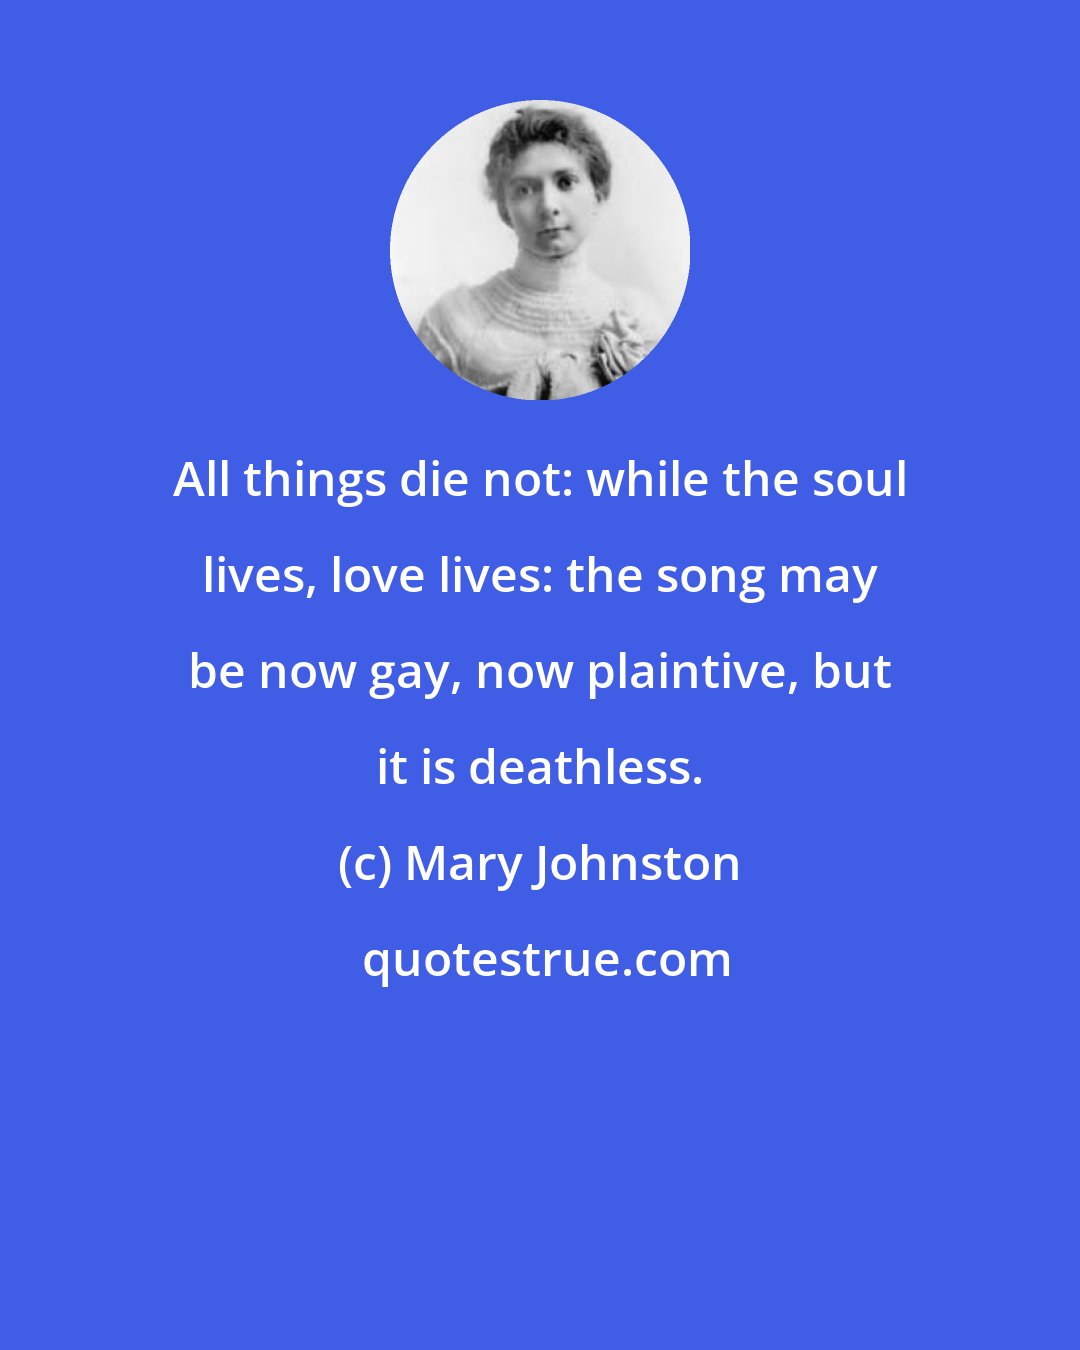 Mary Johnston: All things die not: while the soul lives, love lives: the song may be now gay, now plaintive, but it is deathless.